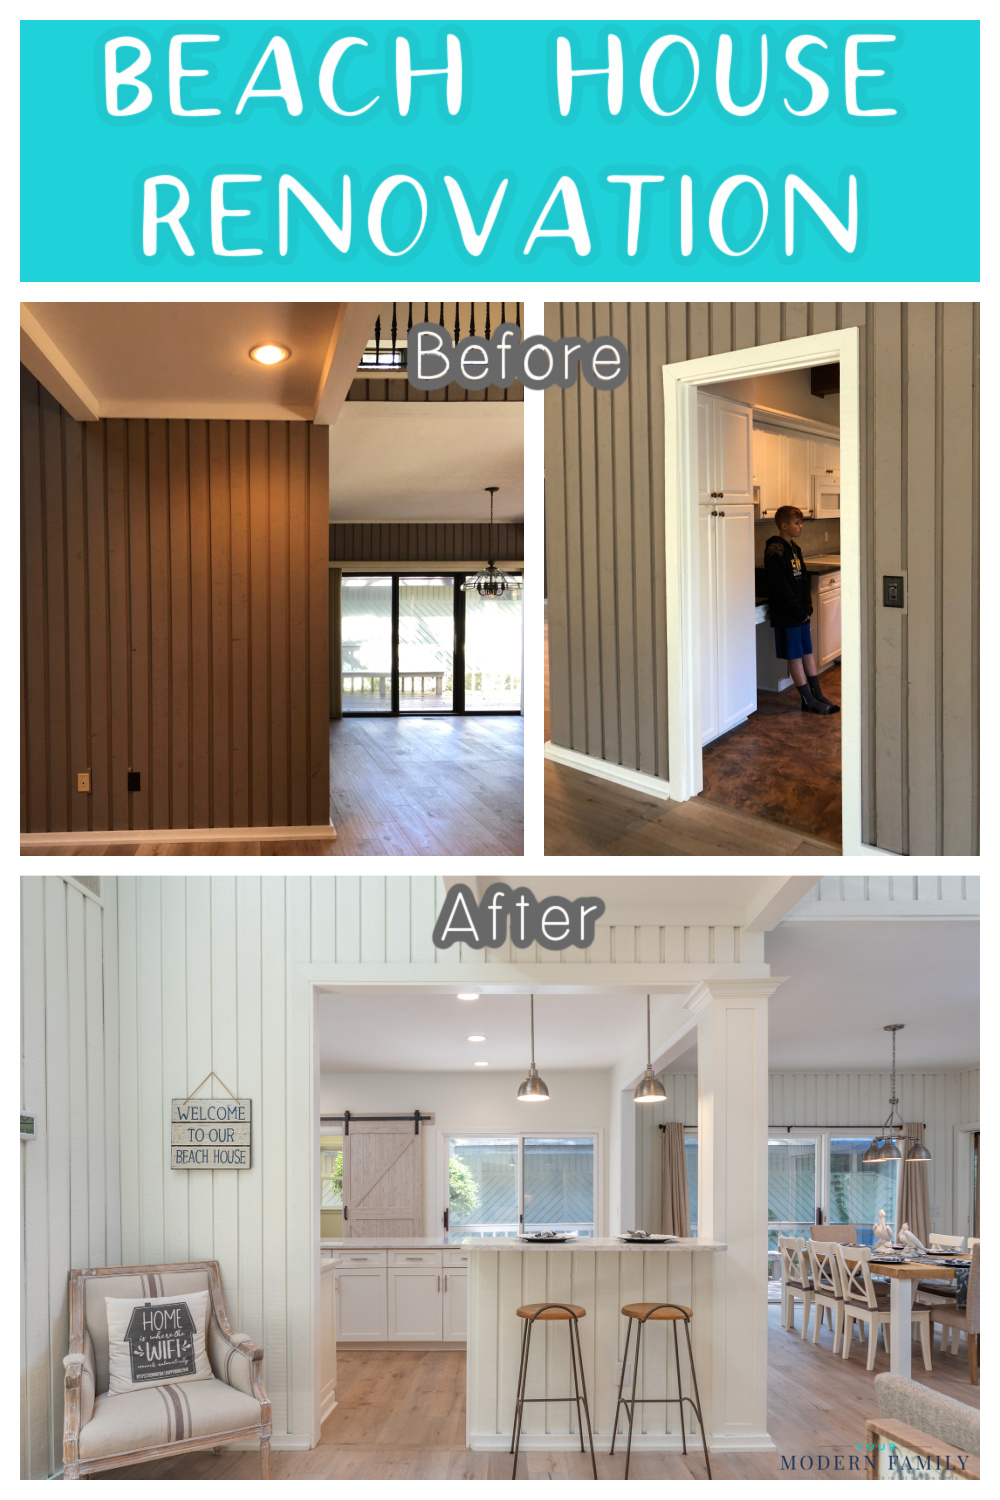 Amazing Interior Renovations: Before and After Images That Impress